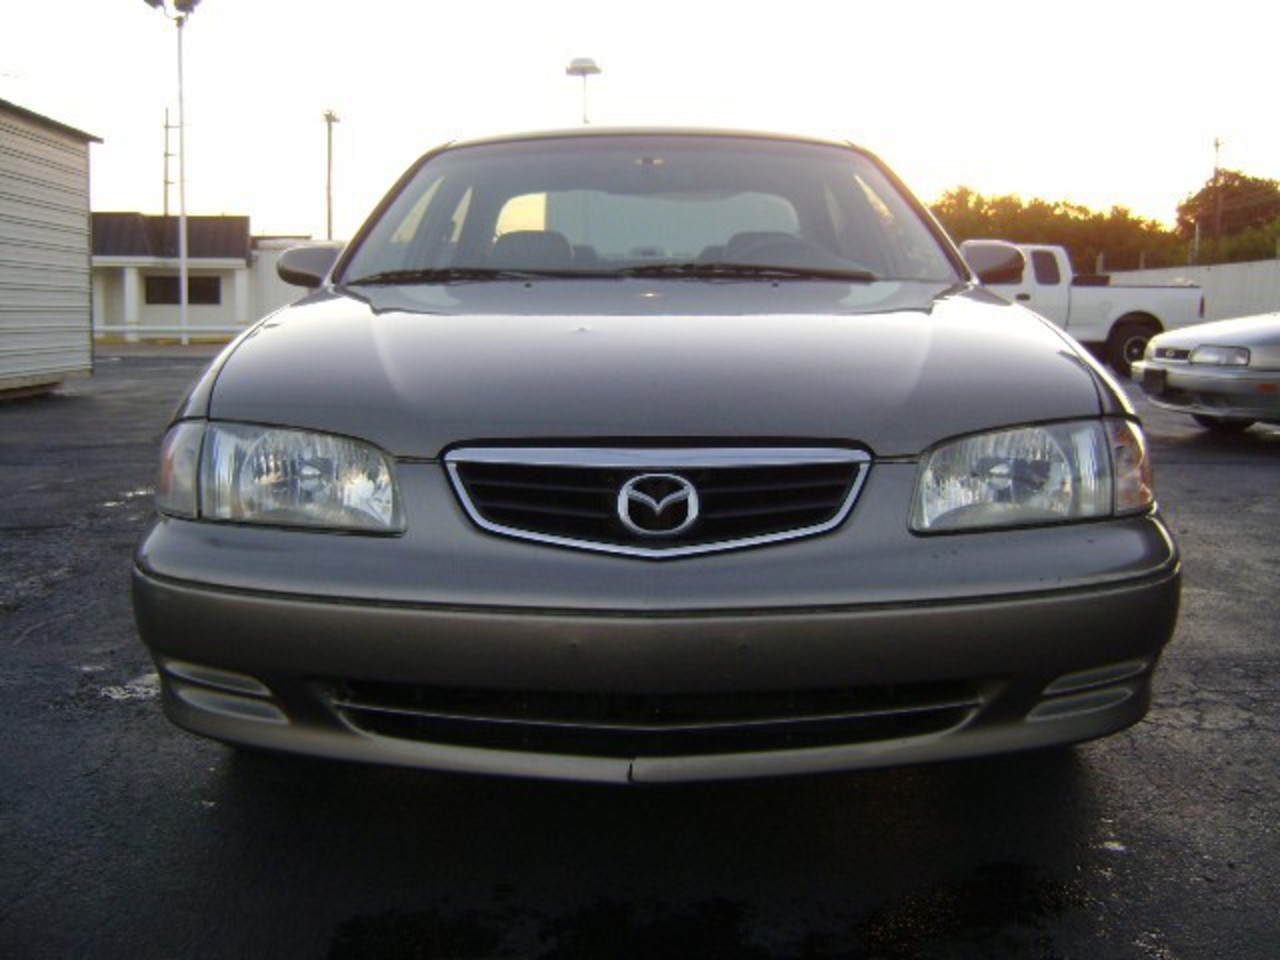 Mazda 626 20 V6 Limited. View Download Wallpaper. 640x480. Comments